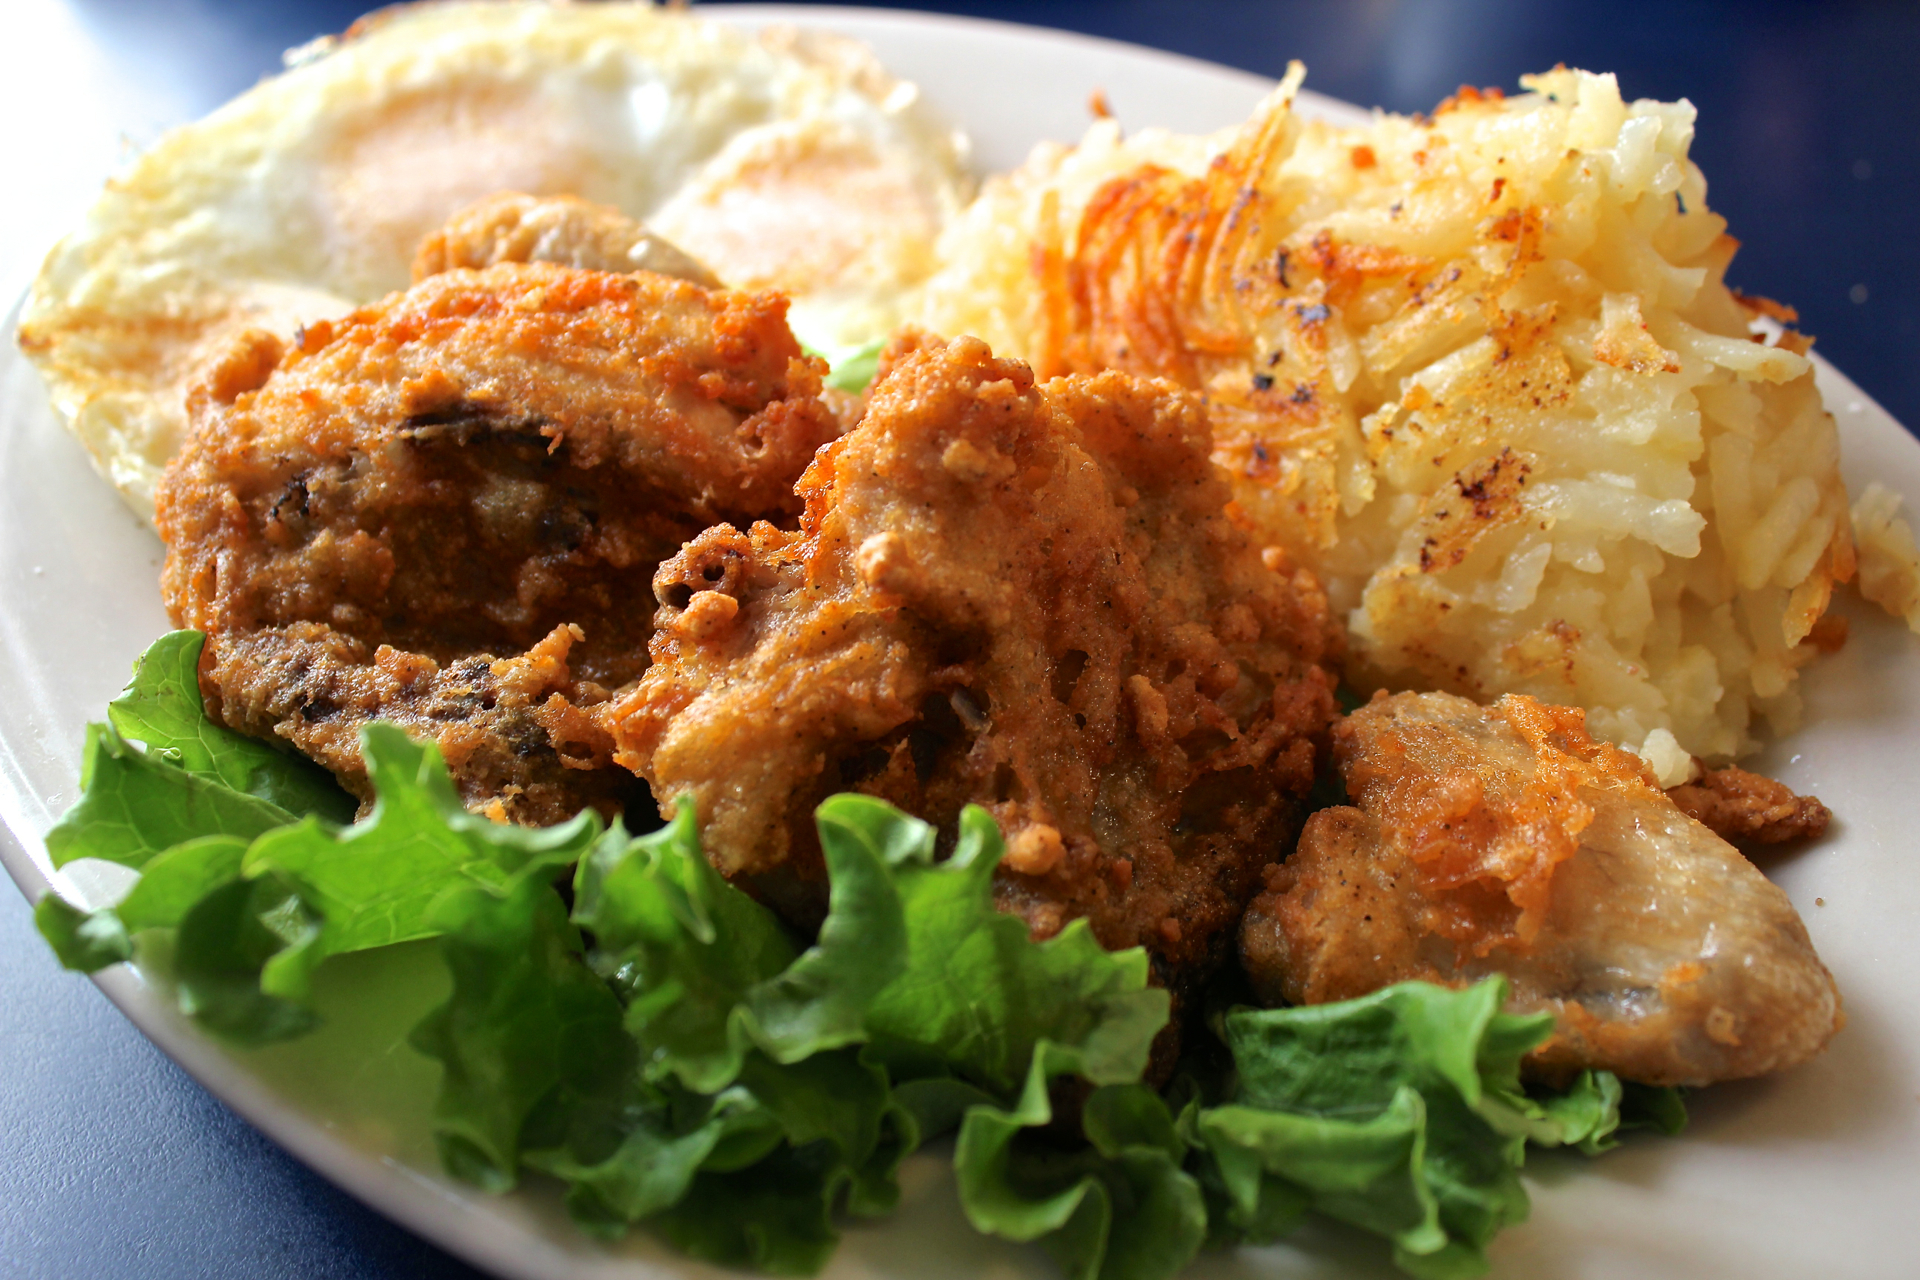 Fried chicken and eggs at Southern Kitchen Coffee Shop.